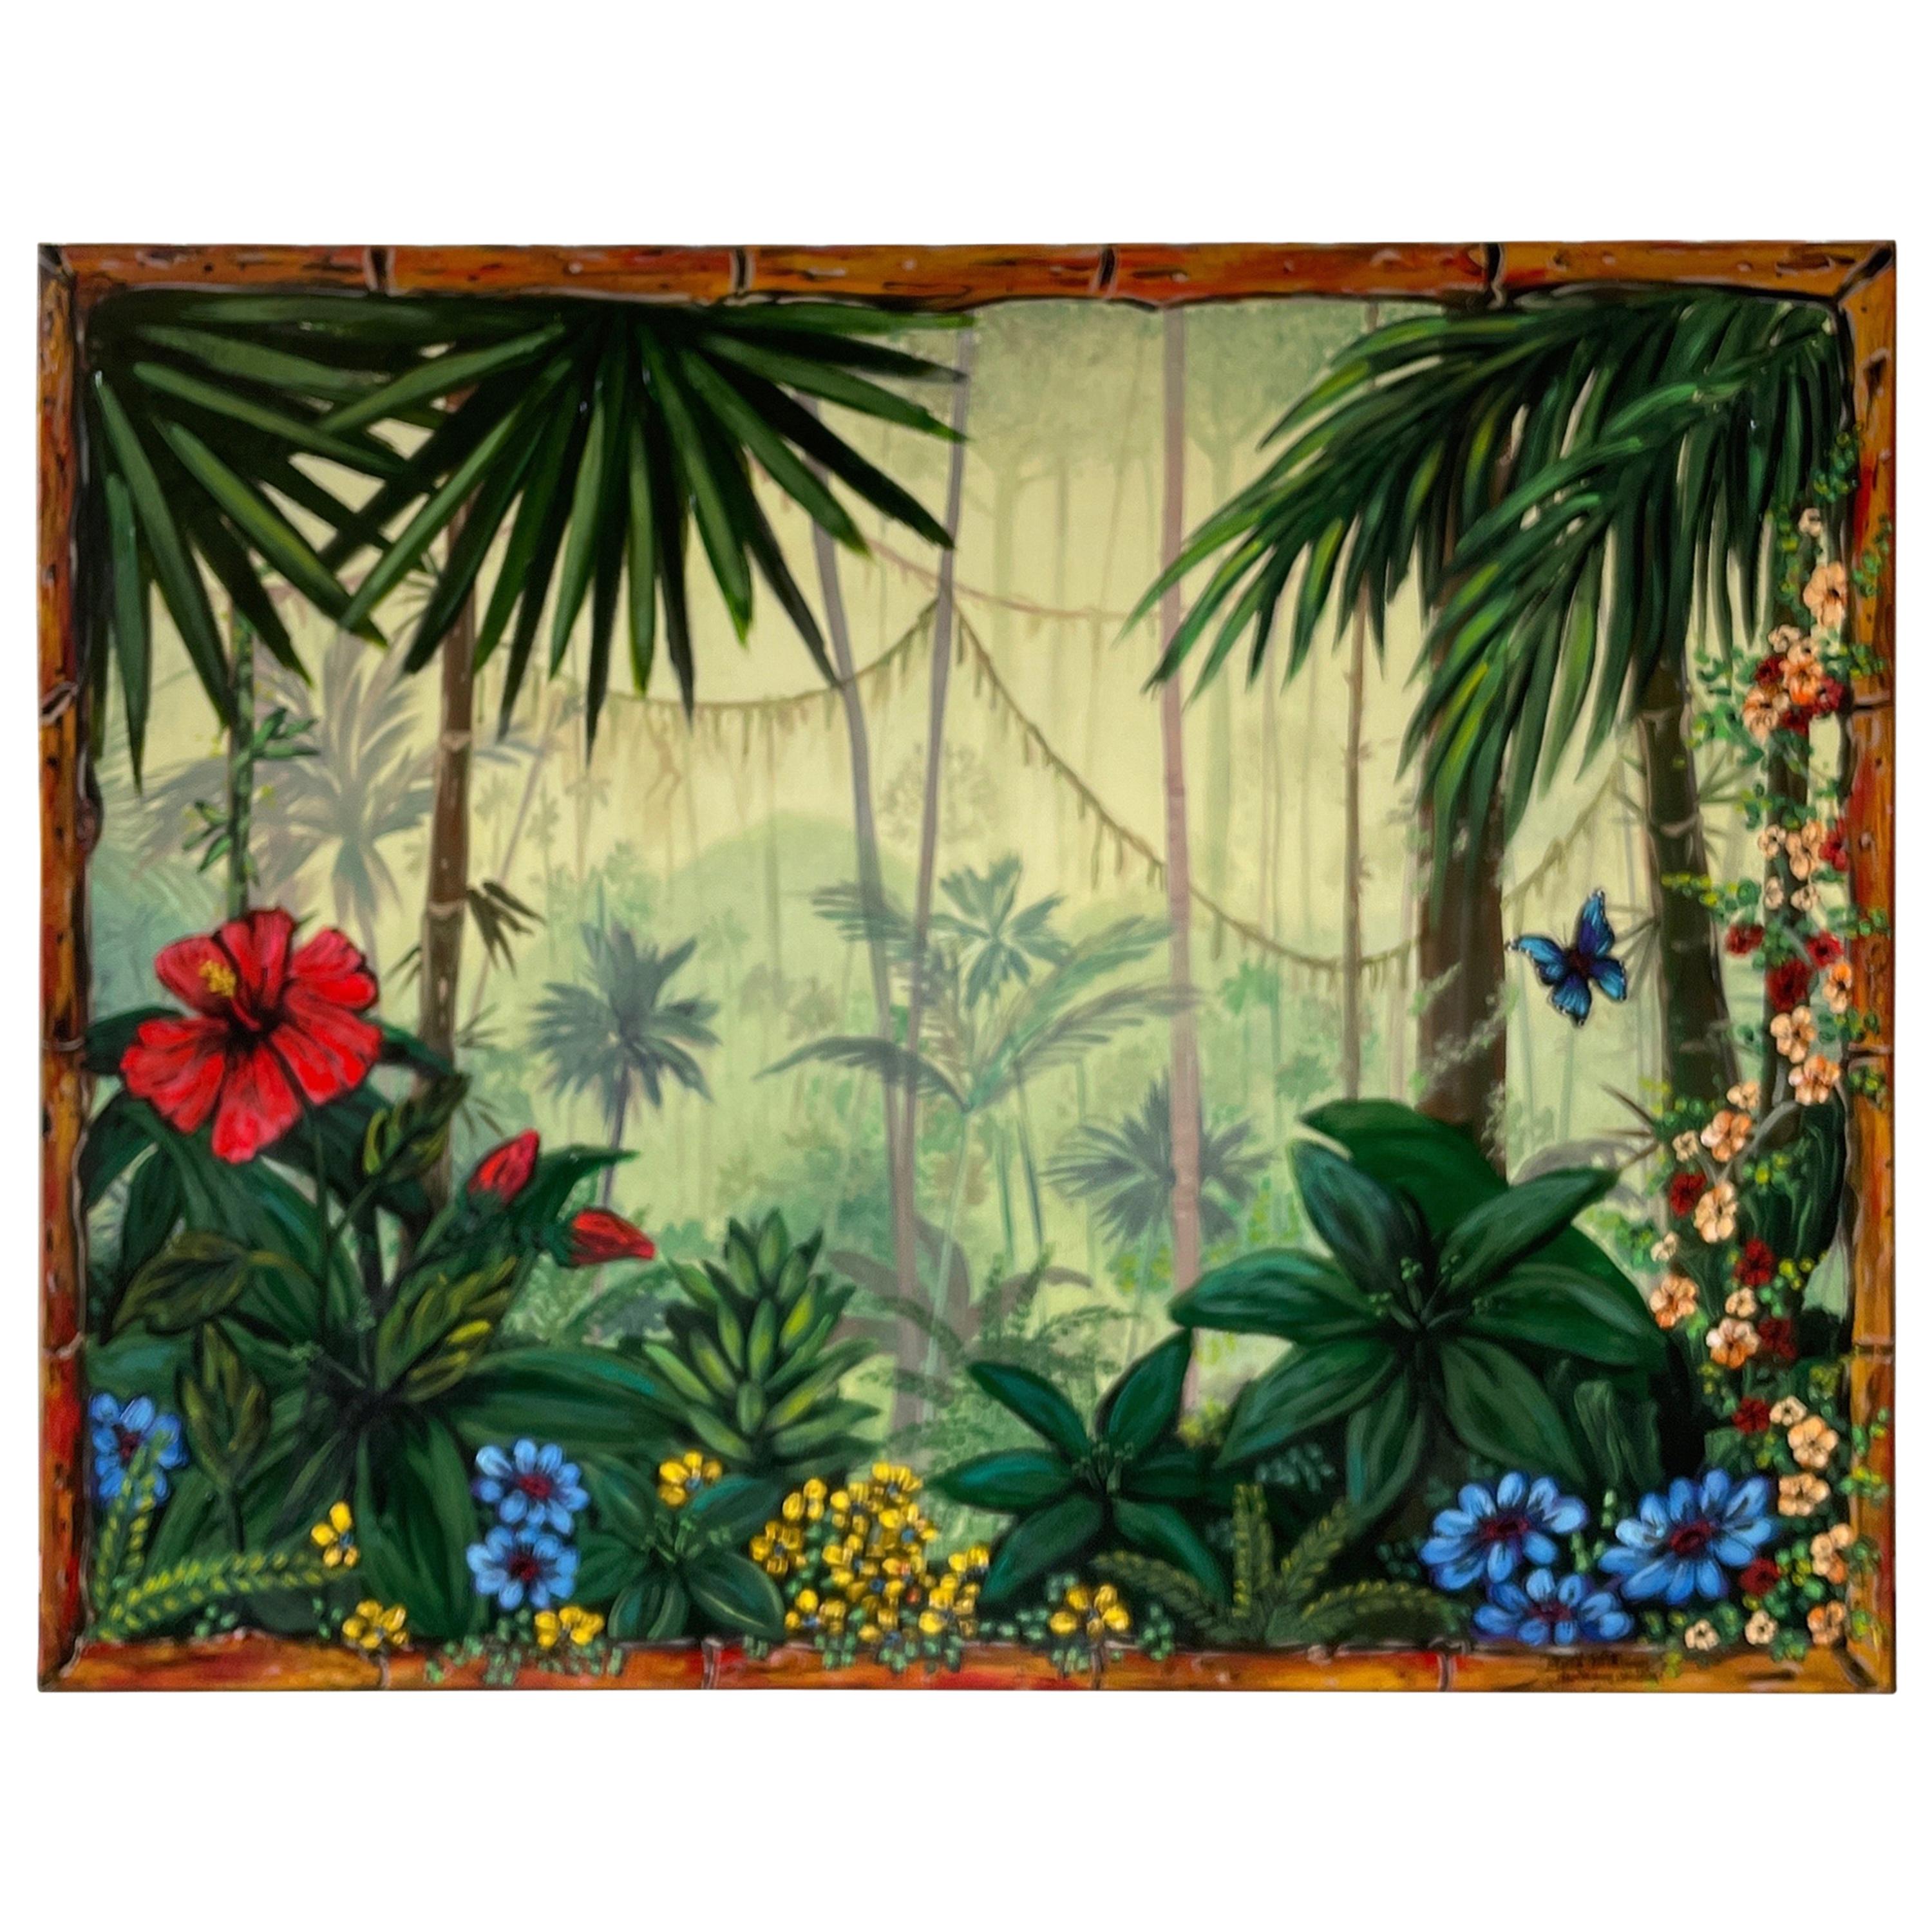 Original Oil Painting of Palm Trees & Flora